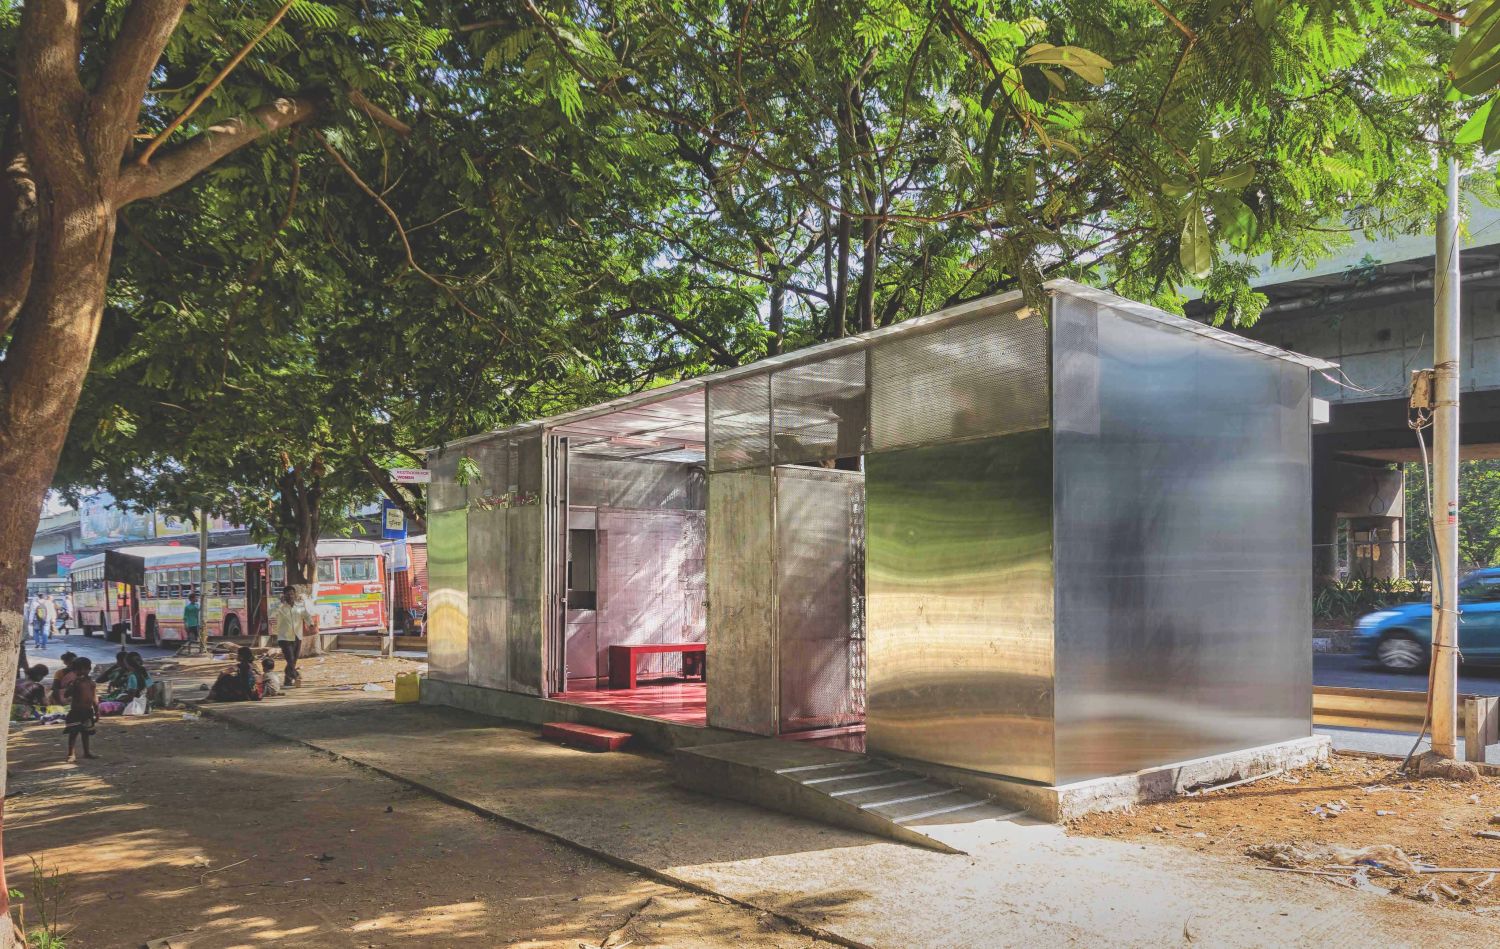 The Light Box – Restroom For Women in Thane, Teen Haath Naka by RC Architects